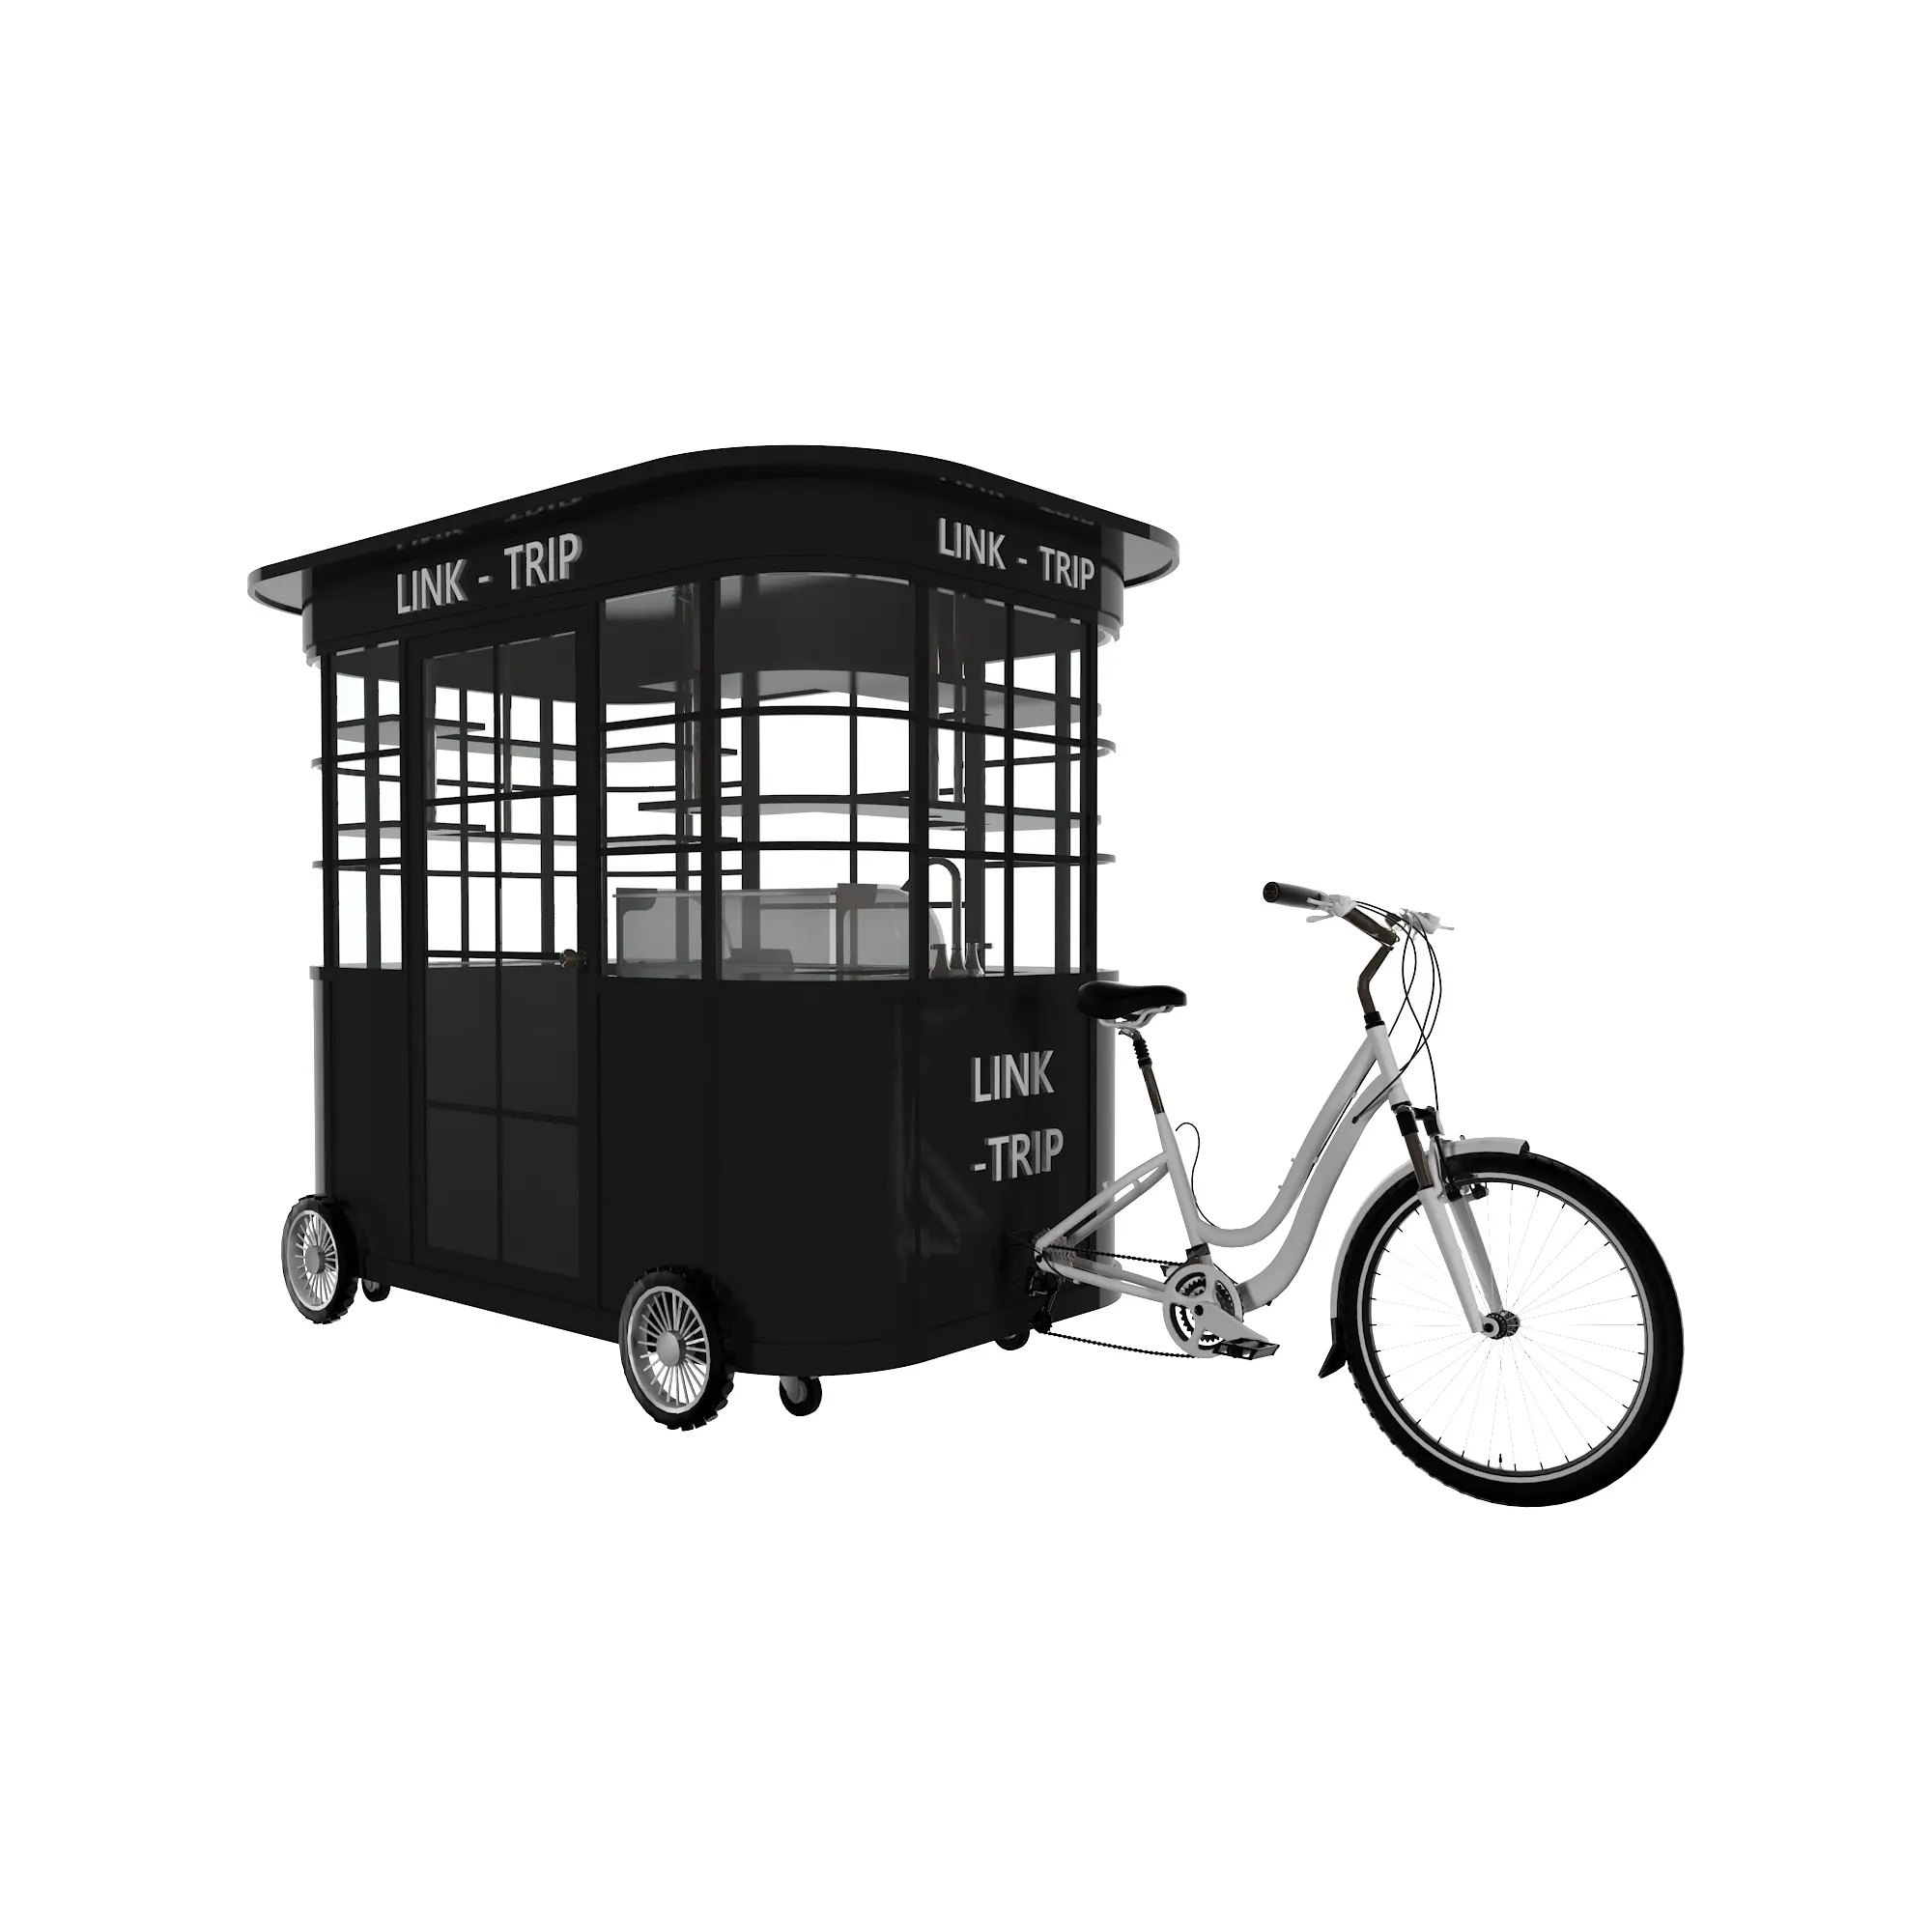 Mobile Trailer Outdoor Decor Modern Luxury 3 Wheel Bicycle Mobile Food Trailer Cart Trolley